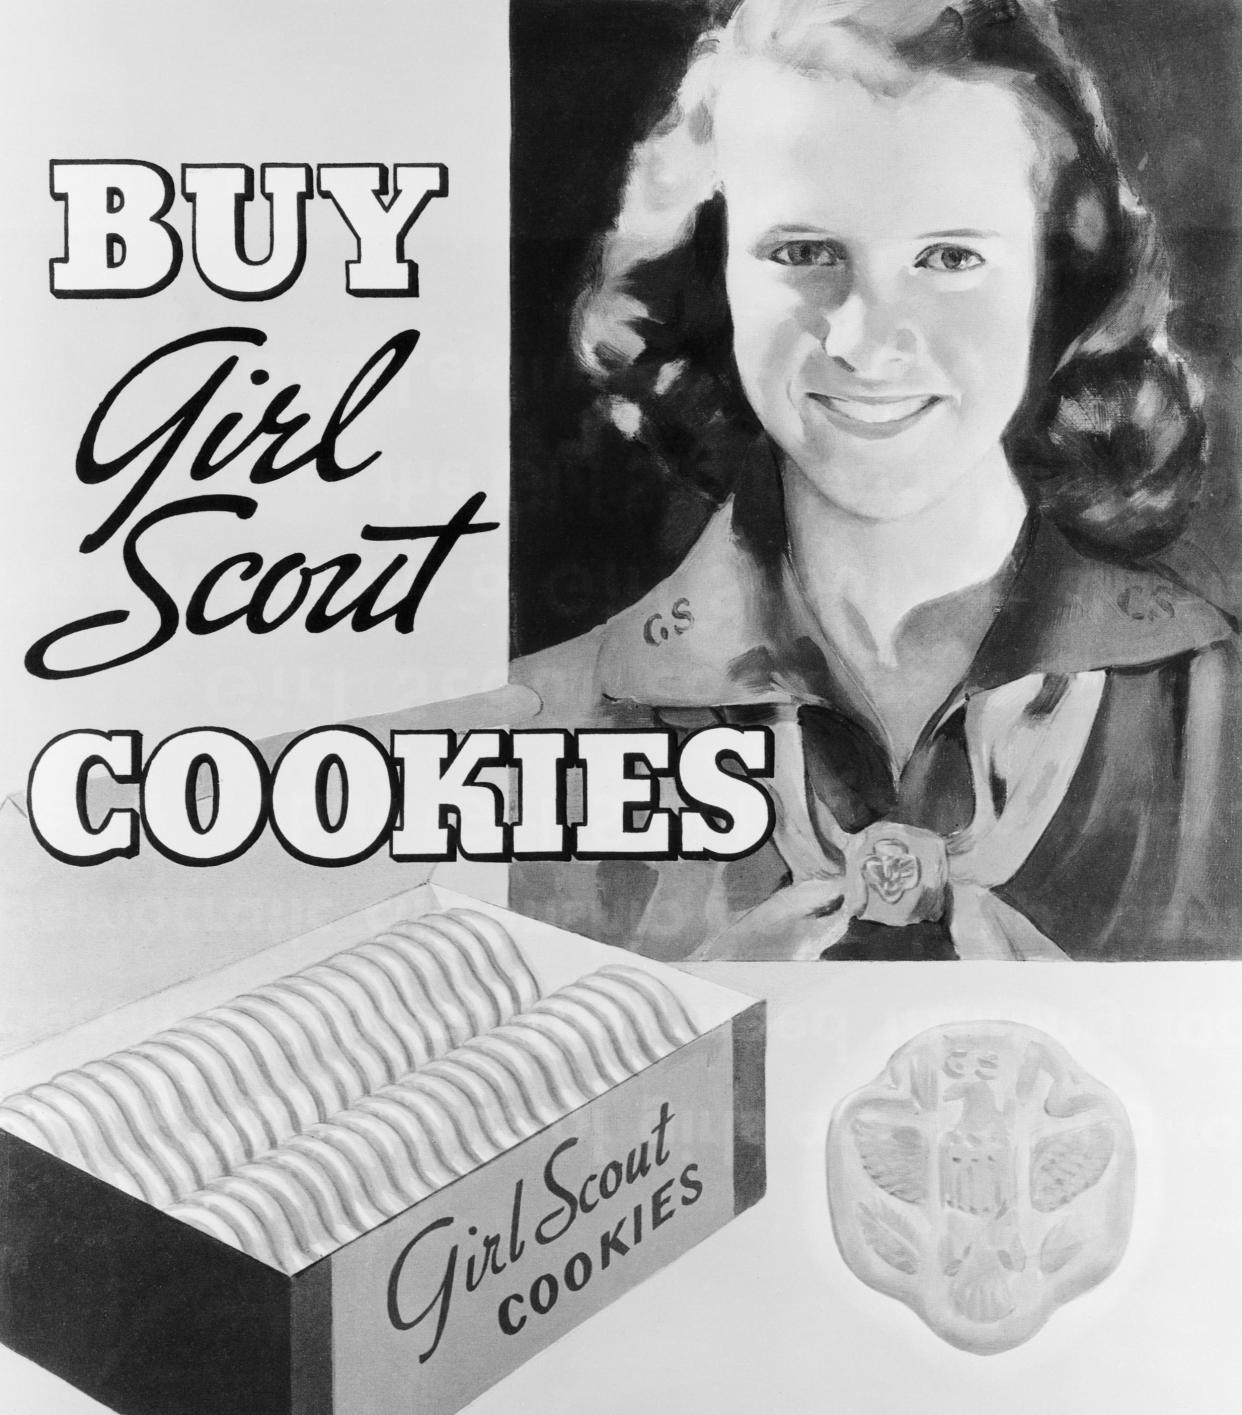 Advertisement Poster for Girl Scout Cookies, Black & White Vintage, 1940s